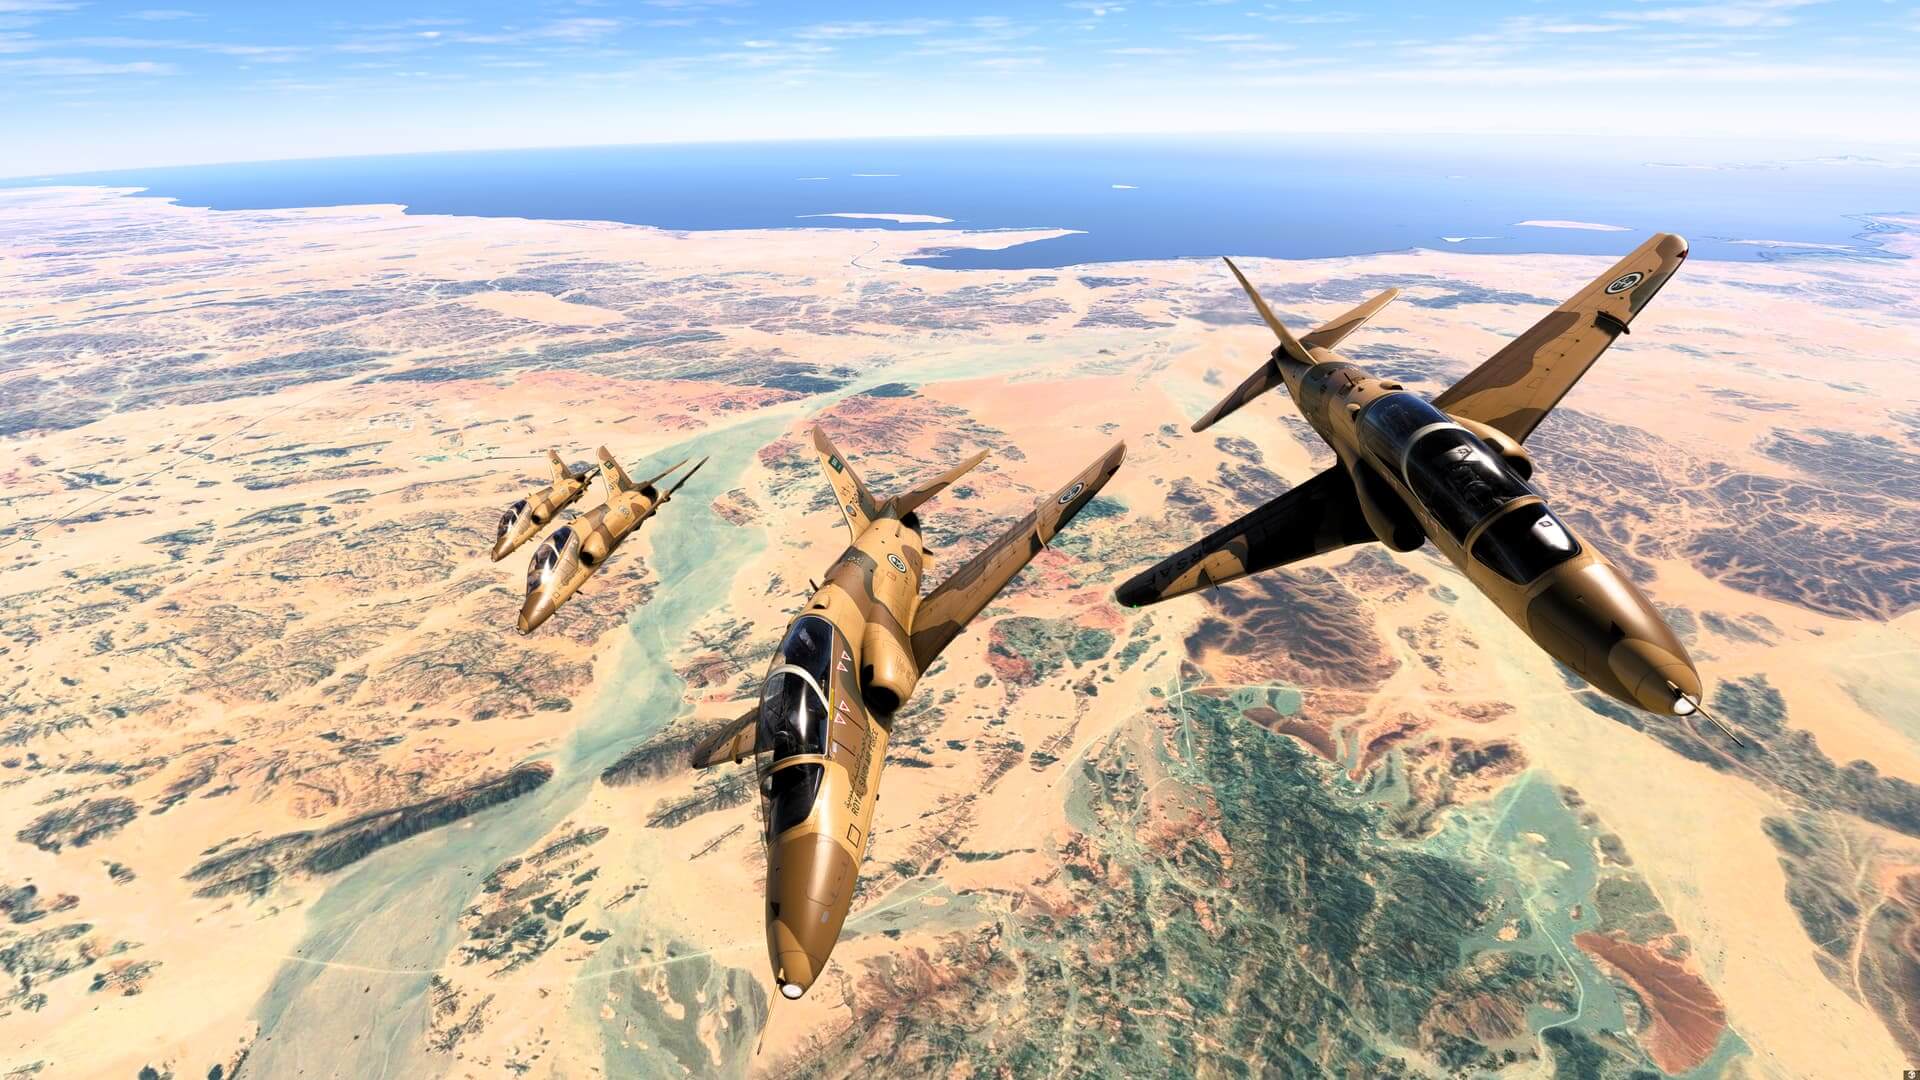 Four BAe Hawk aircraft in desert military paint cruise bank right in close formation above sandy terrain below